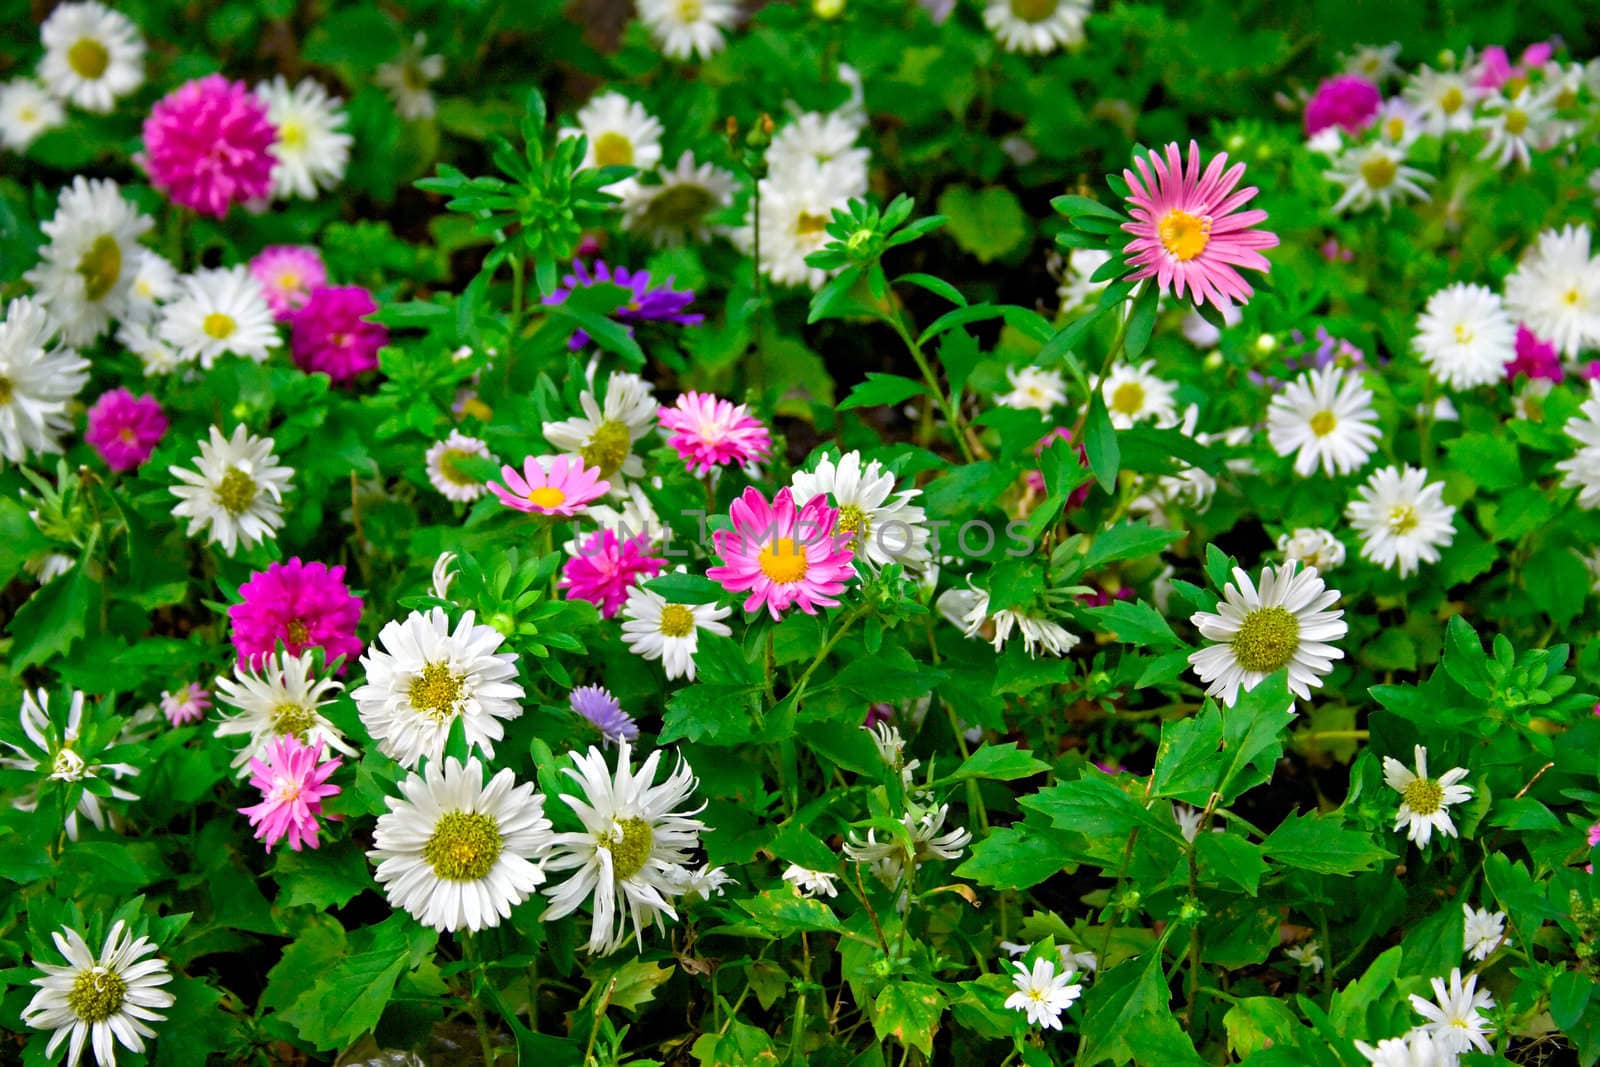 Field of flowers pink and white colors. A background